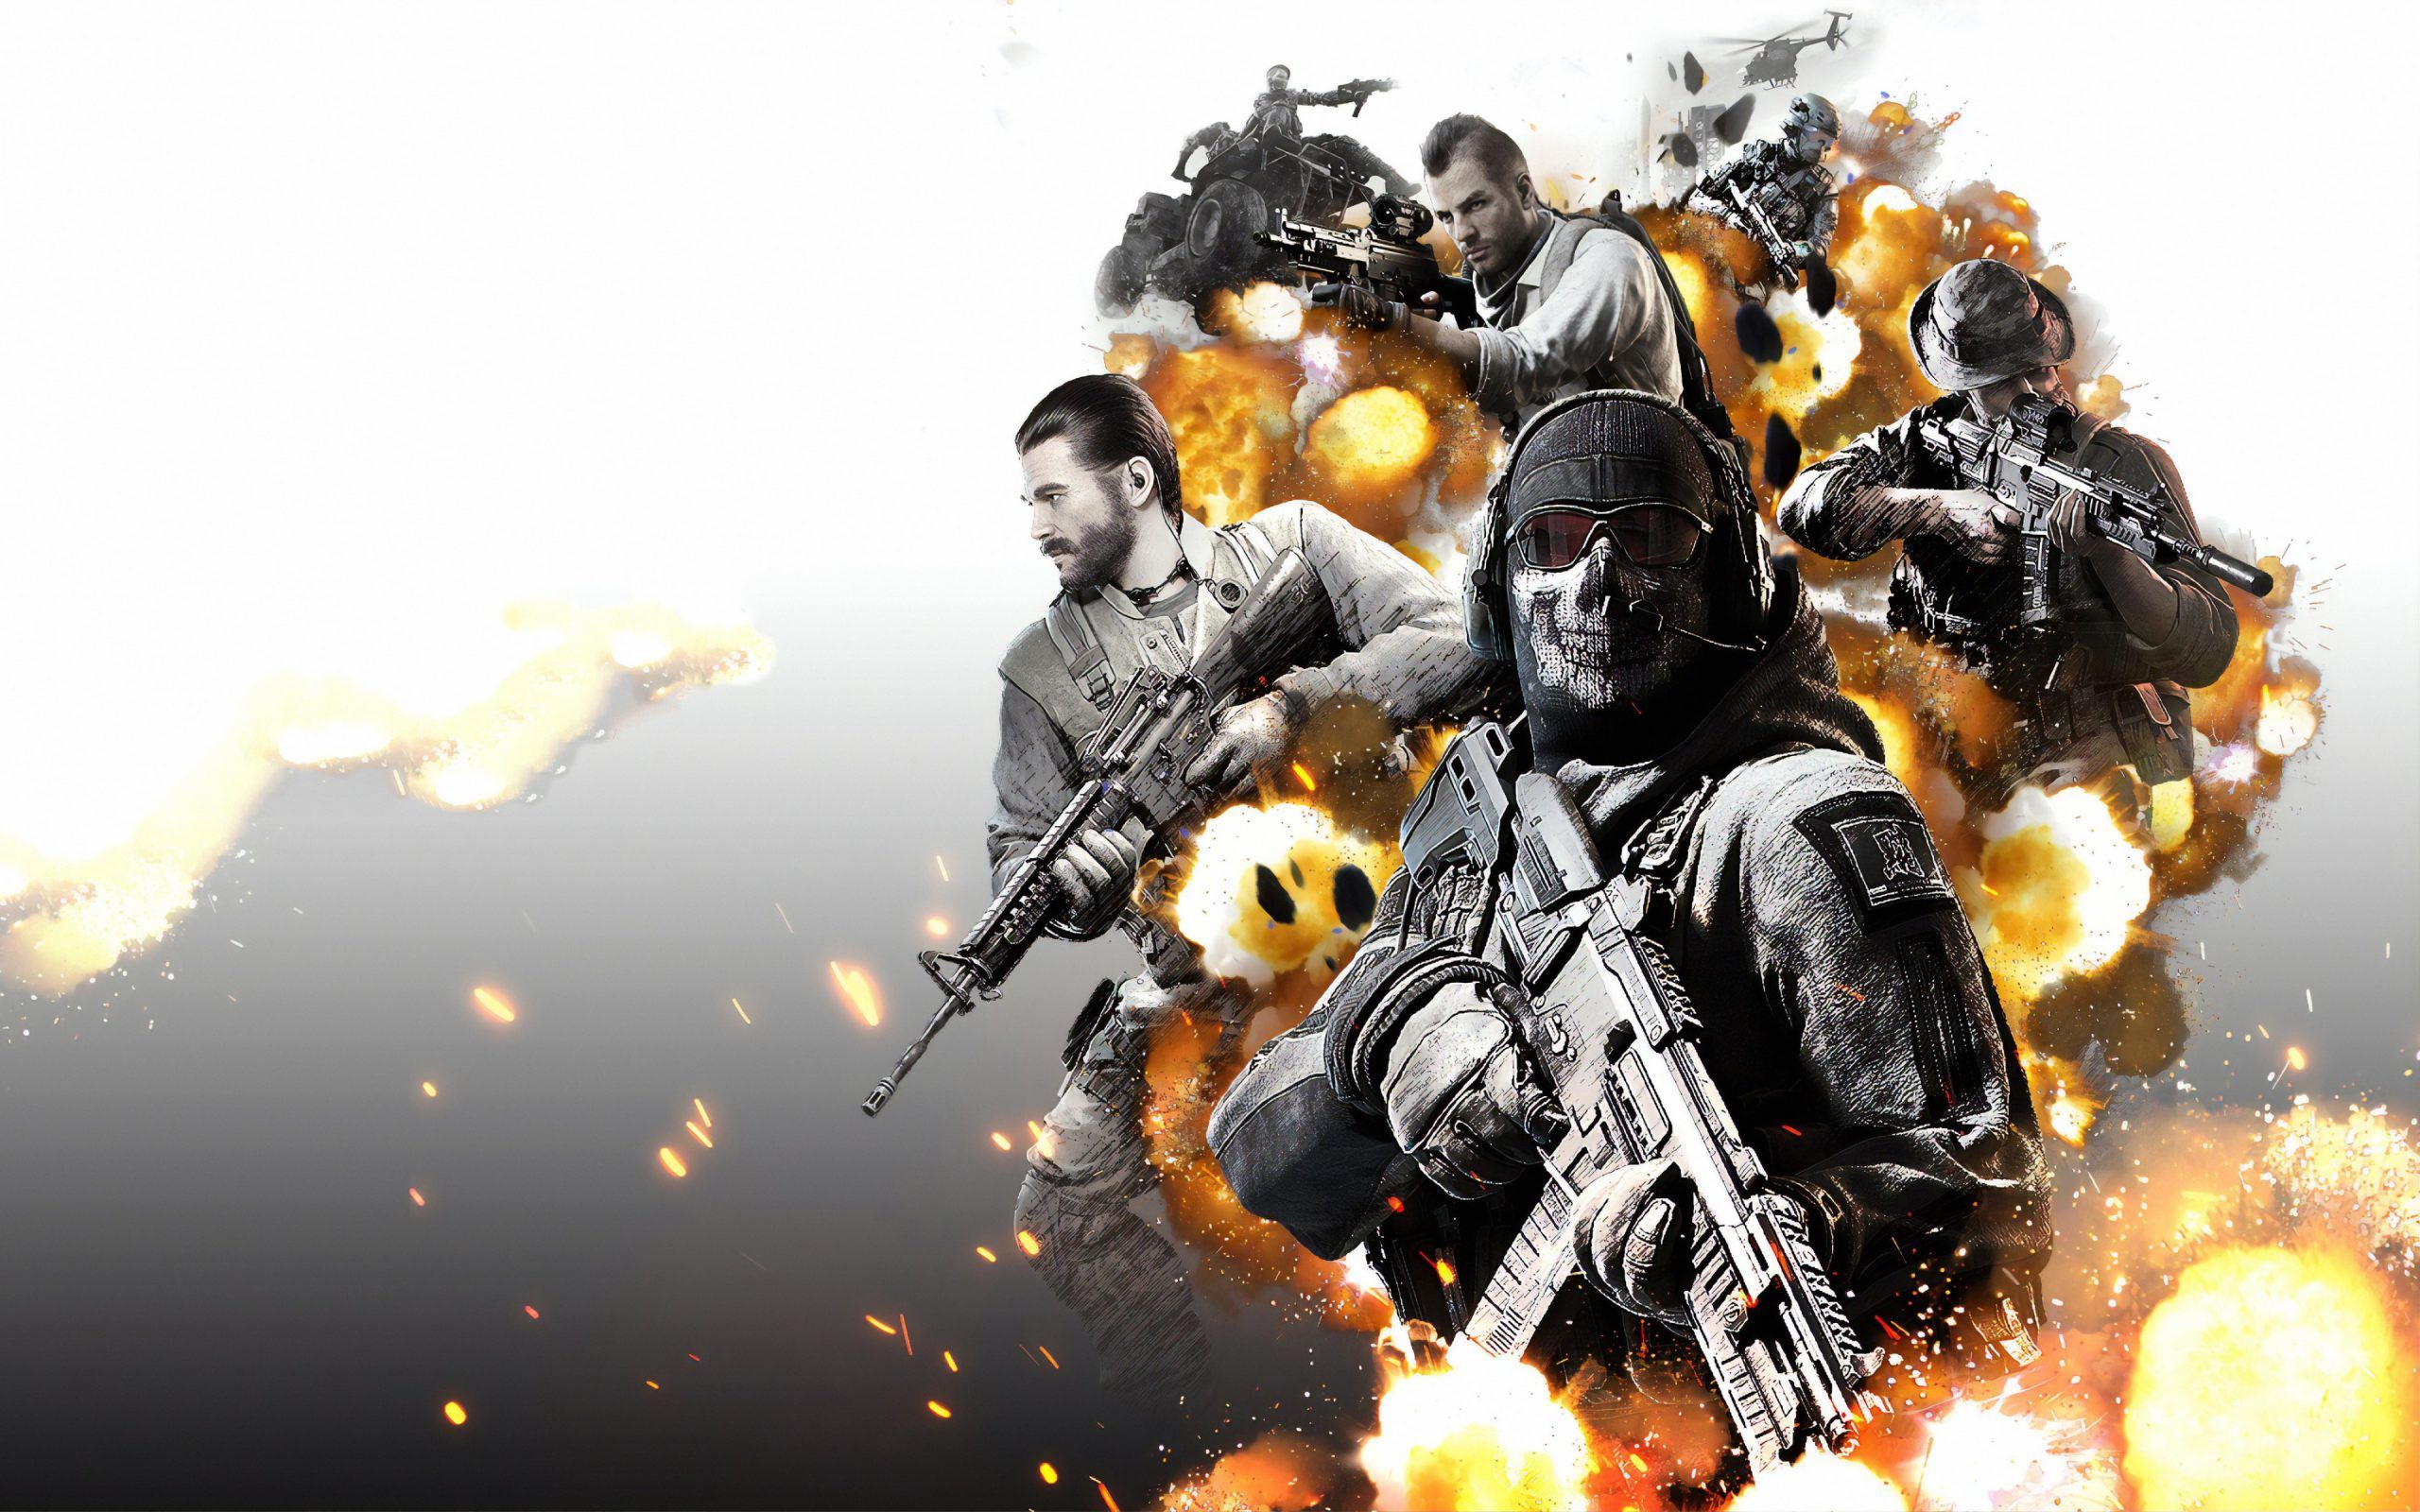 call of duty warzone download for pc